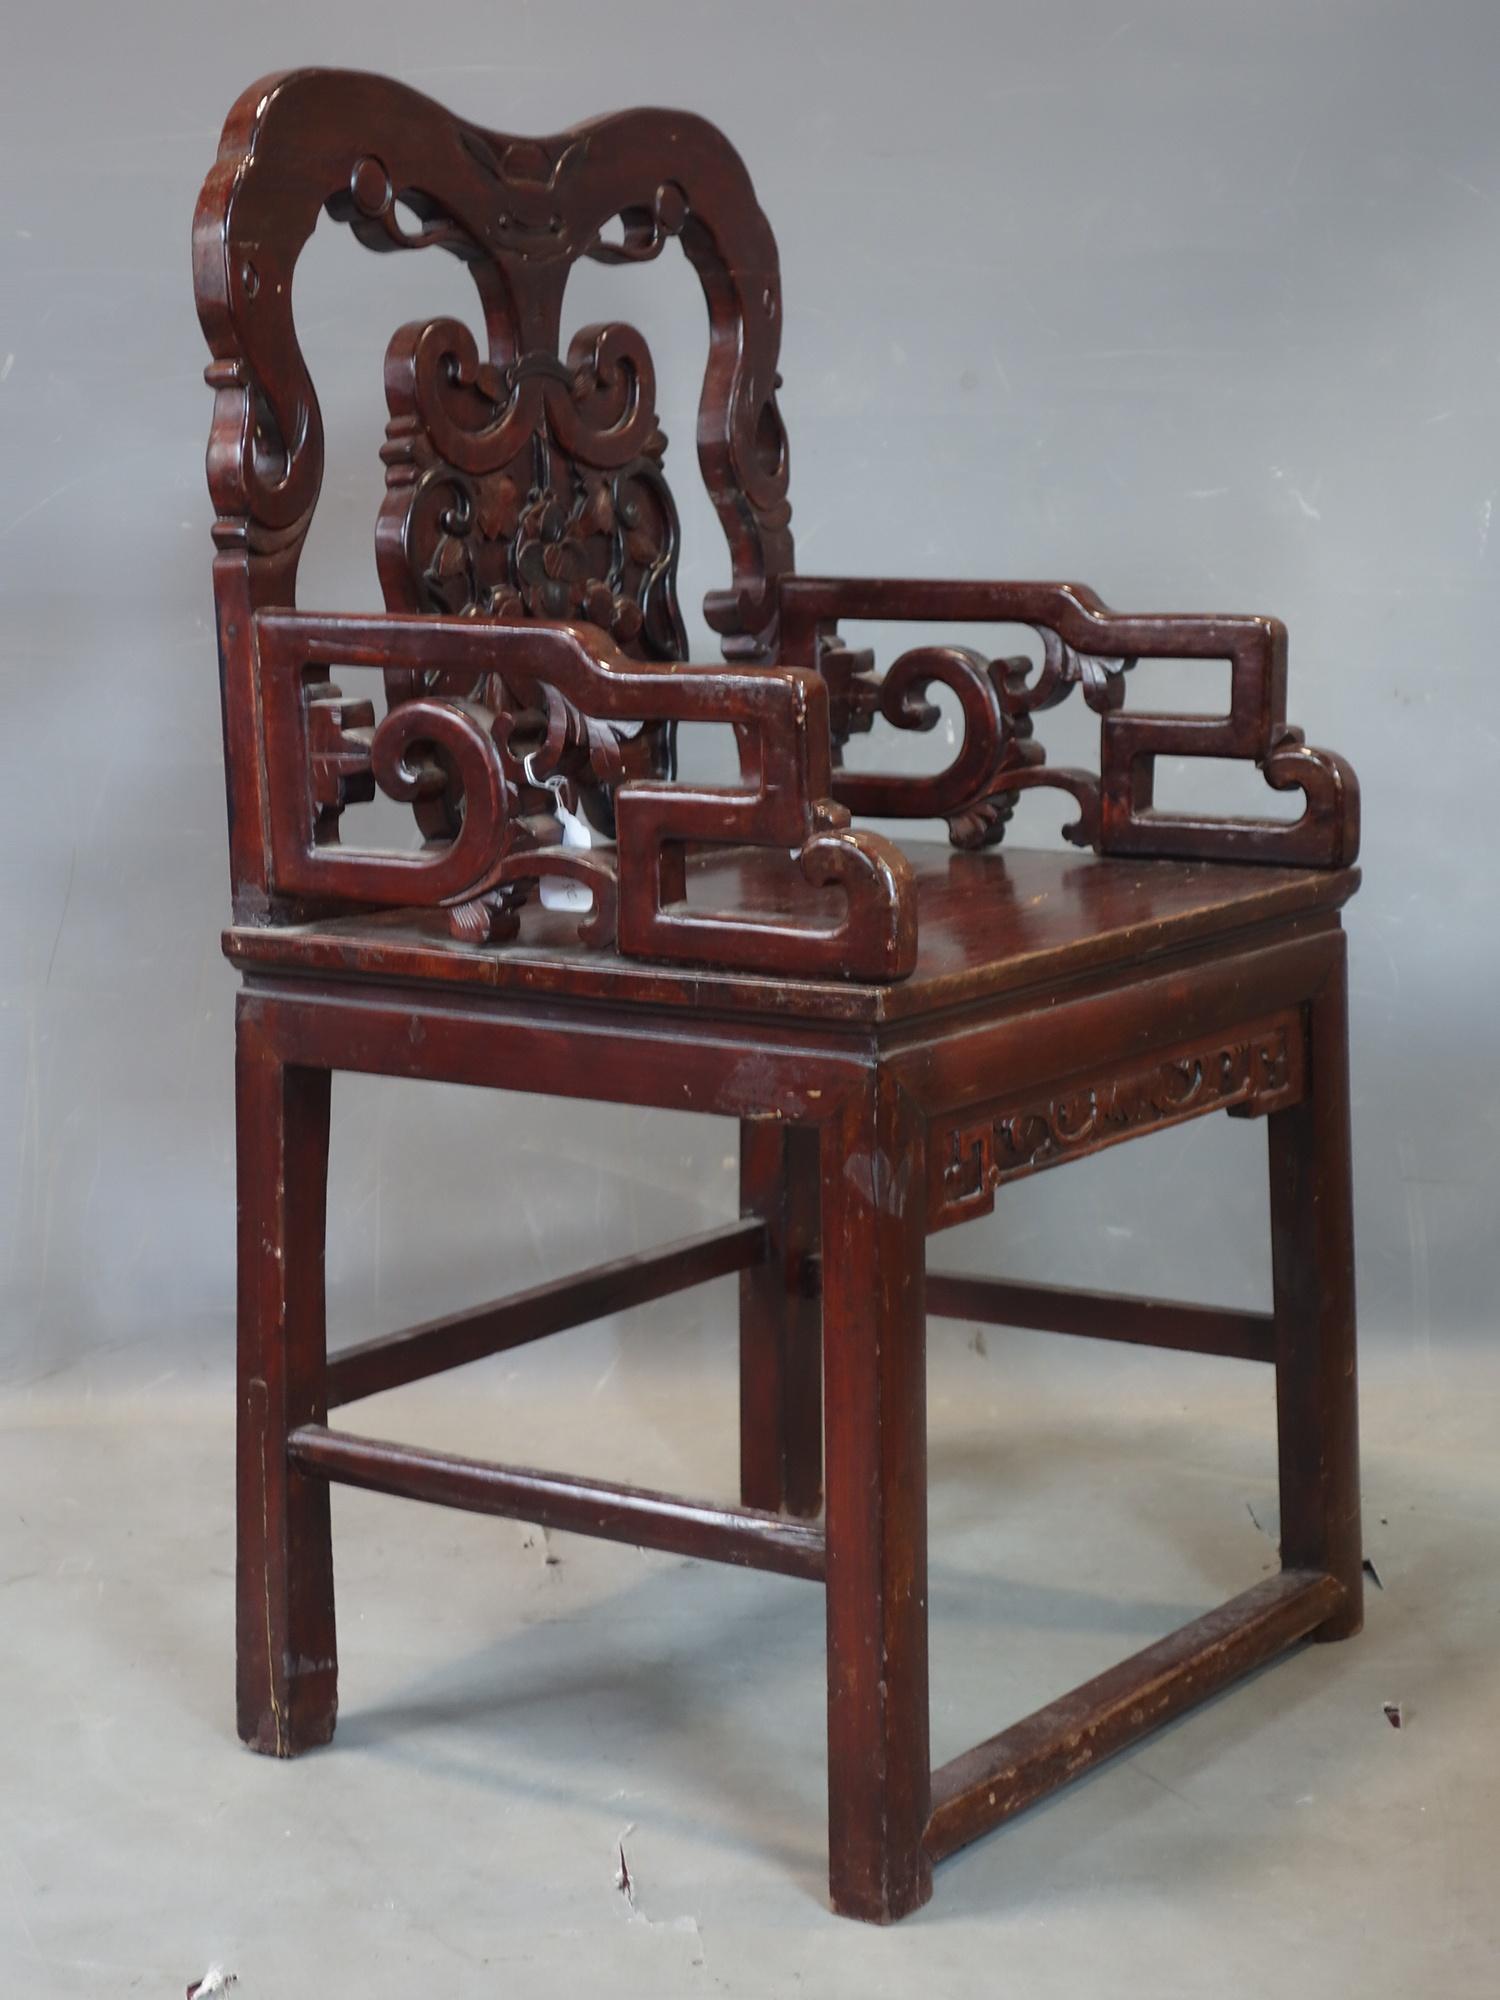 A 20th century Chinese hardwood throne chair, H.99 W.60 D.44cm - Image 2 of 3